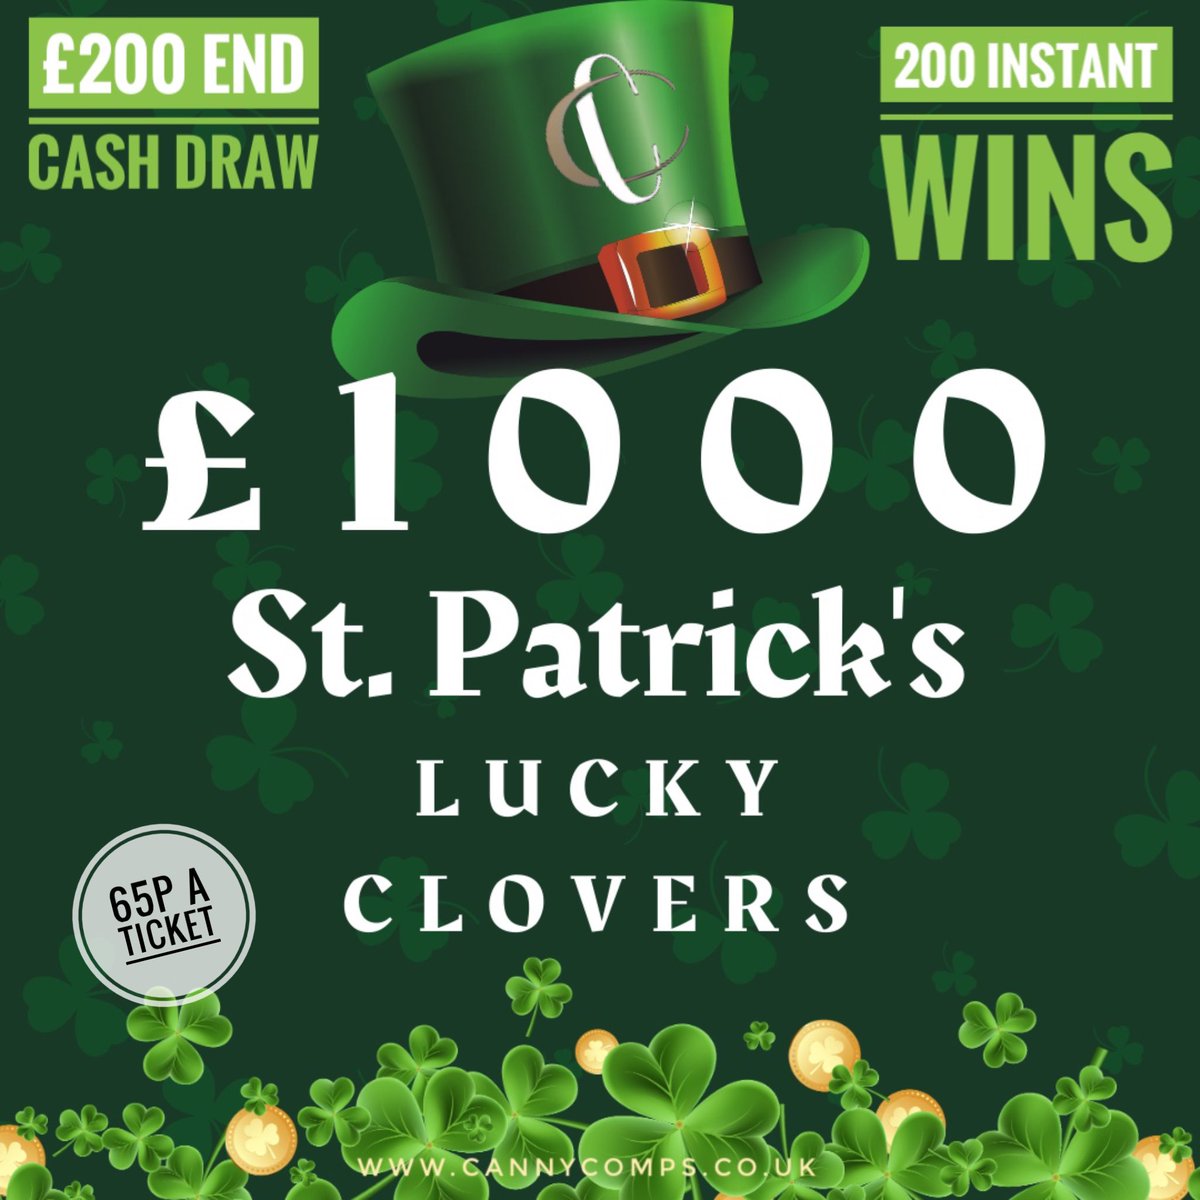 ☘️ NEW COMP ALERT ☘️ Find the hundreds of St Patrick’s Lucky Clovers hidden among the numbers. Hit a clover and win up to £50 cash, which are now instantly paid out and many more up for grabs and a final draw of £200 #cannycomps #stpatricksday2024 #StPatricksDay #wincash